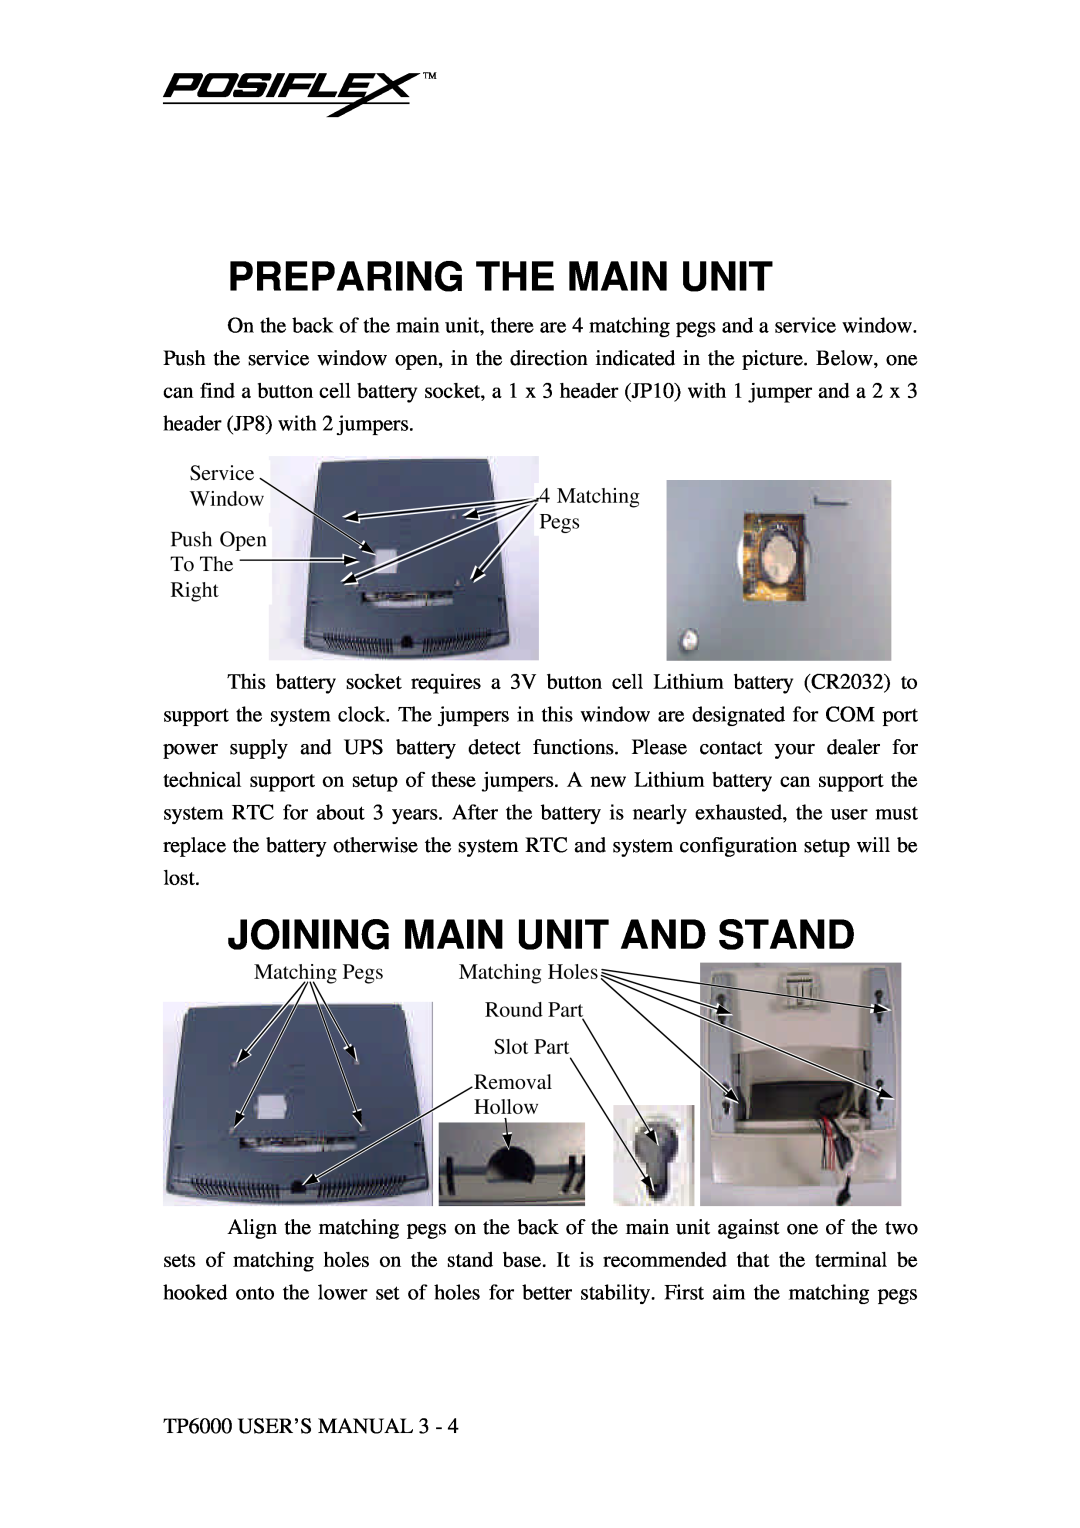 Mustek TP-6000 user manual Preparing The Main Unit, Joining Main Unit And Stand 